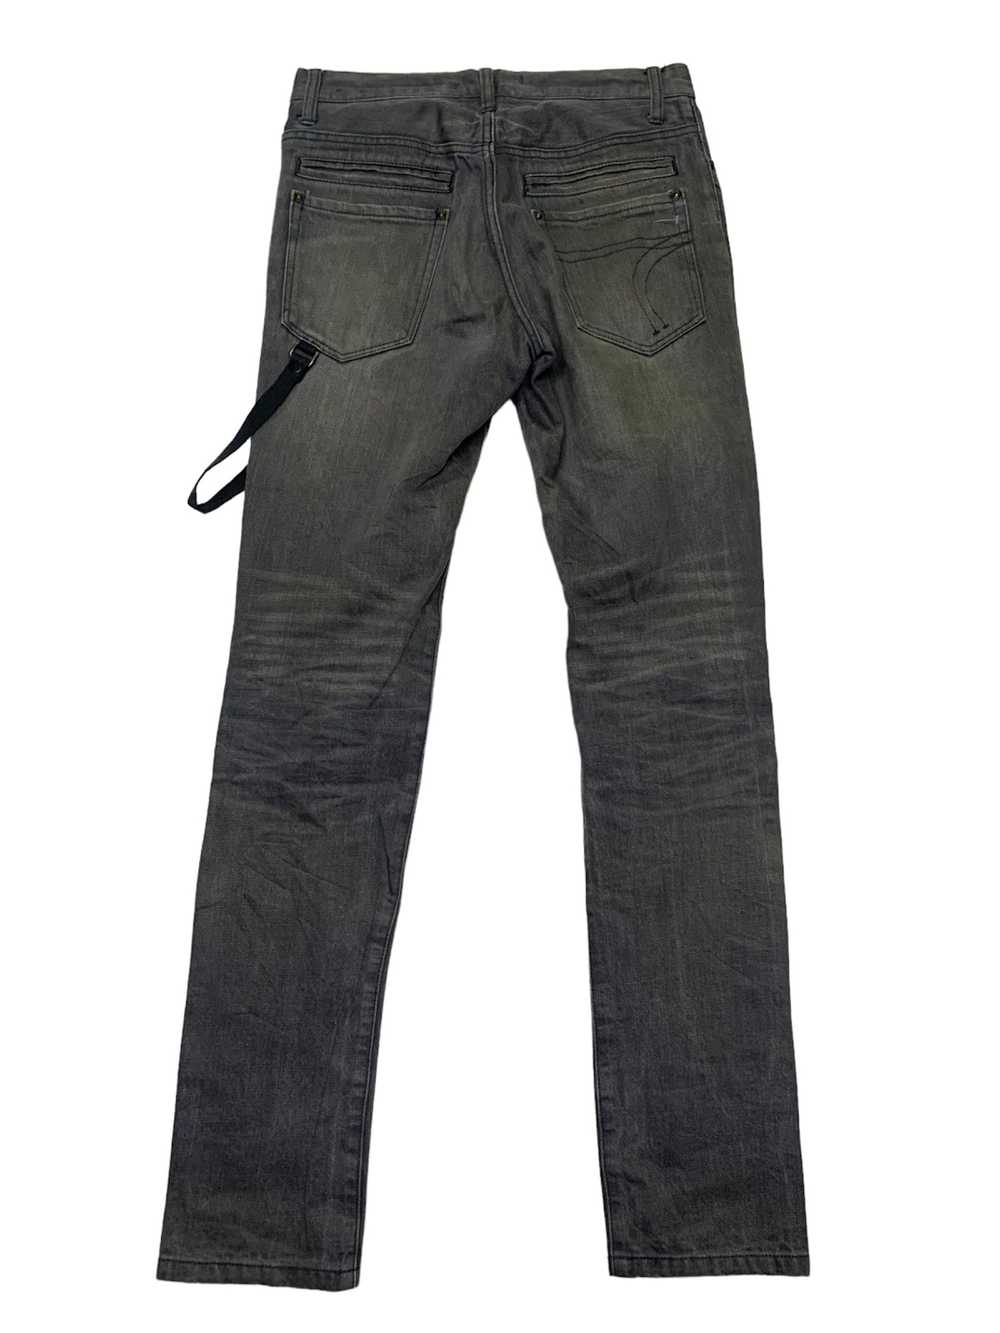 Issey Miyake × Tete Homme Tete homme skiny jeans - image 5